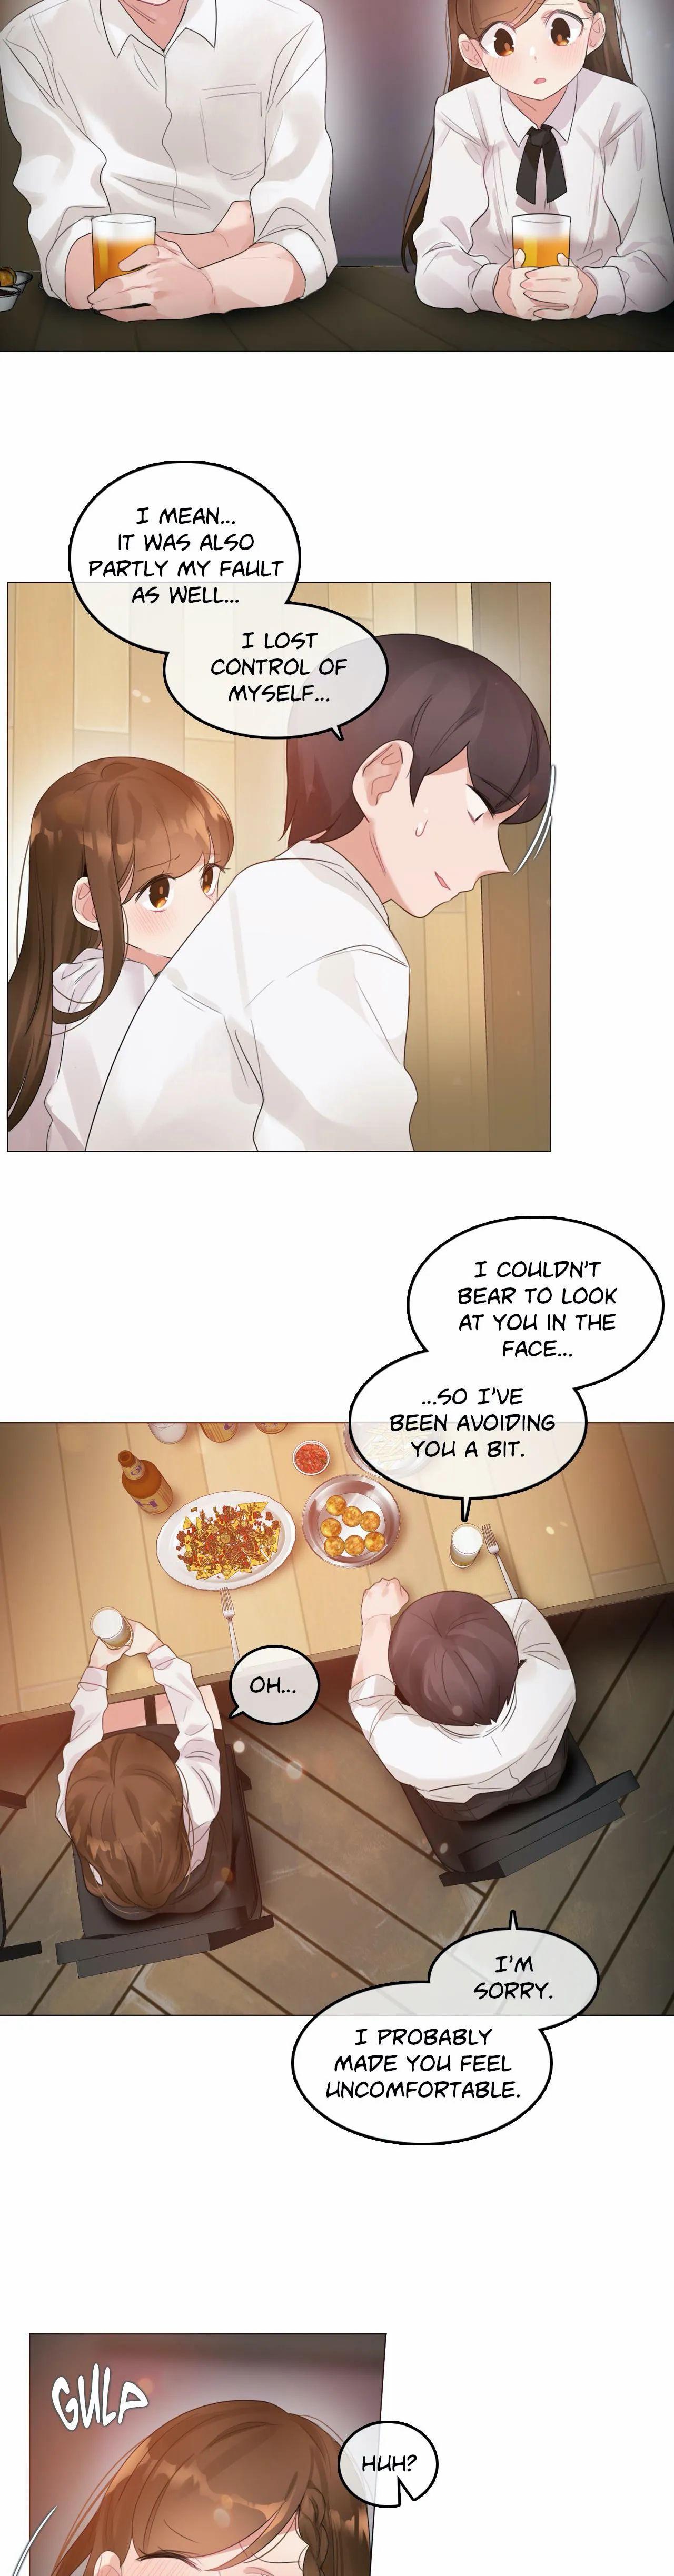 Perverts' Daily Lives Episode 1: Her Secret Recipe Ch1-19 171